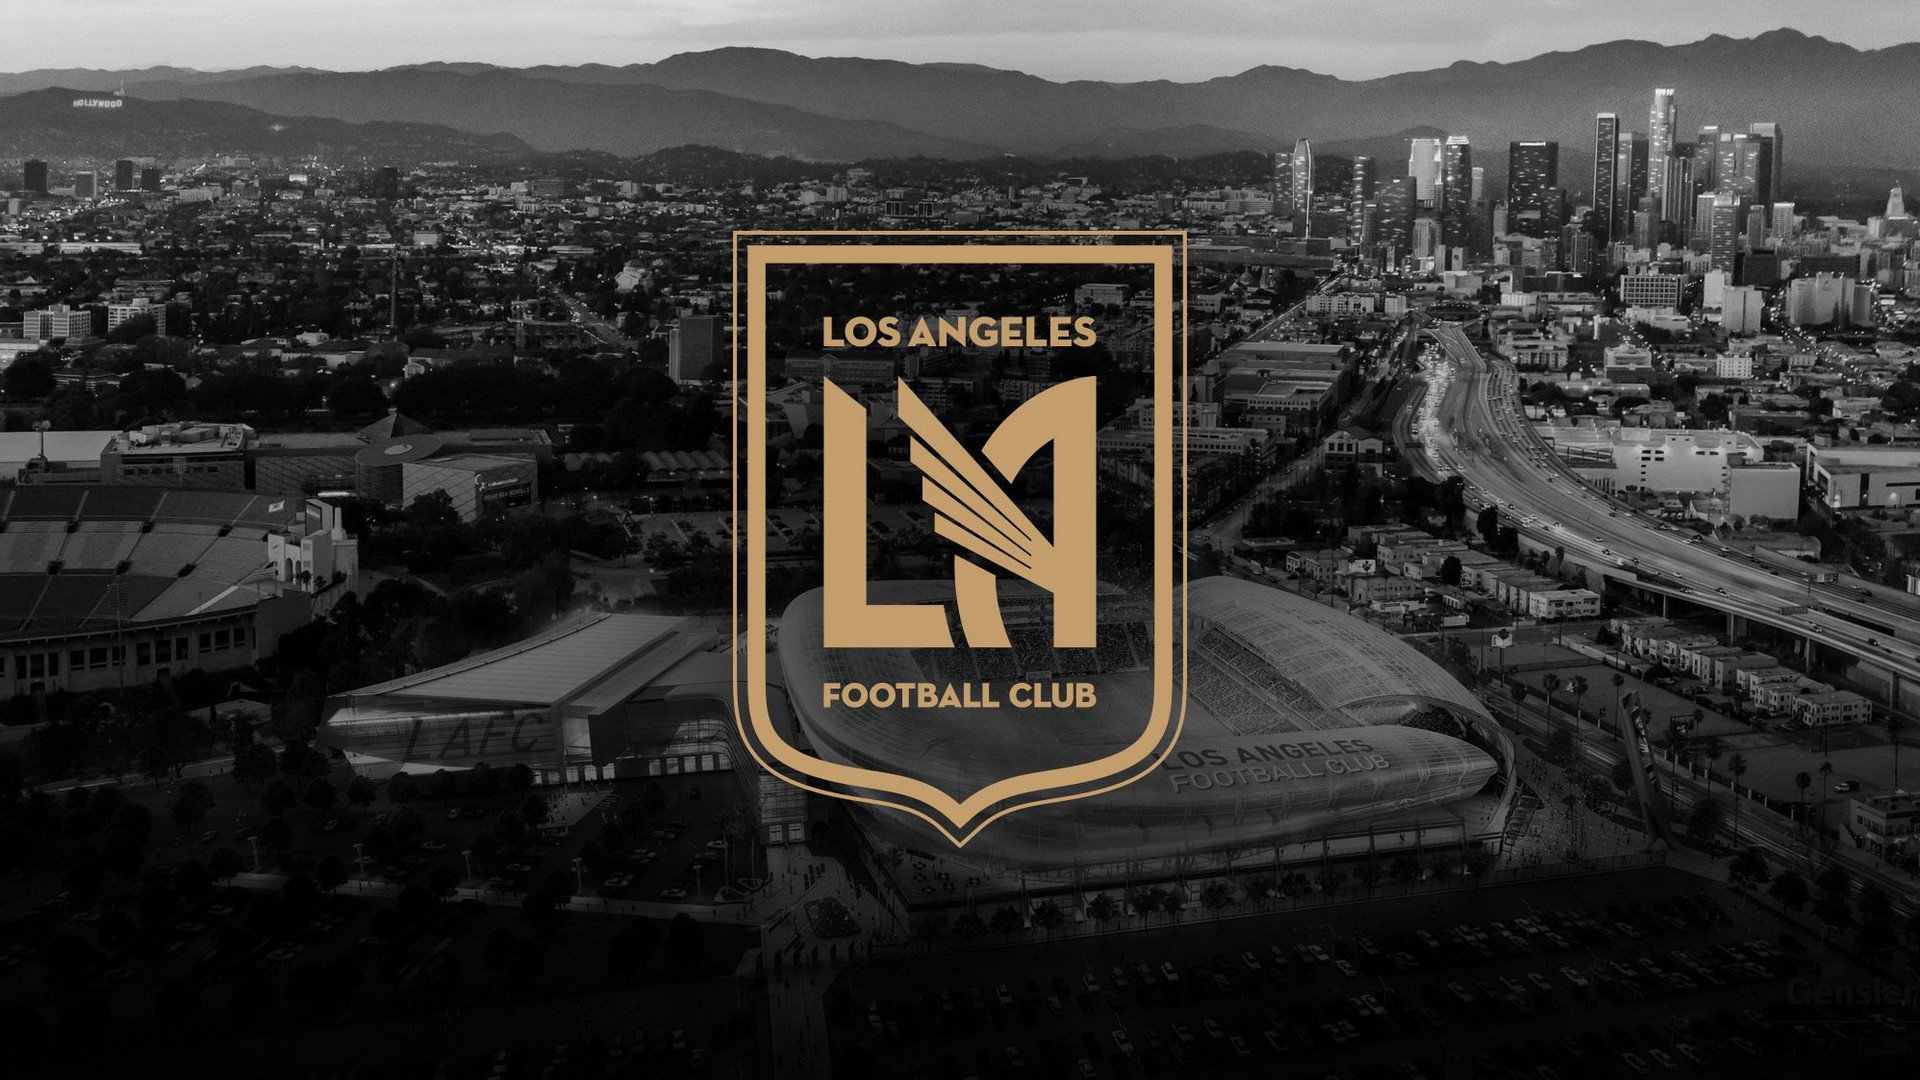 Wallpaper Desktop Los Angeles FC HD with high-resolution 1920x1080 pixel. You can use this wallpaper for your Desktop Computers, Mac Screensavers, Windows Backgrounds, iPhone Wallpapers, Tablet or Android Lock screen and another Mobile device